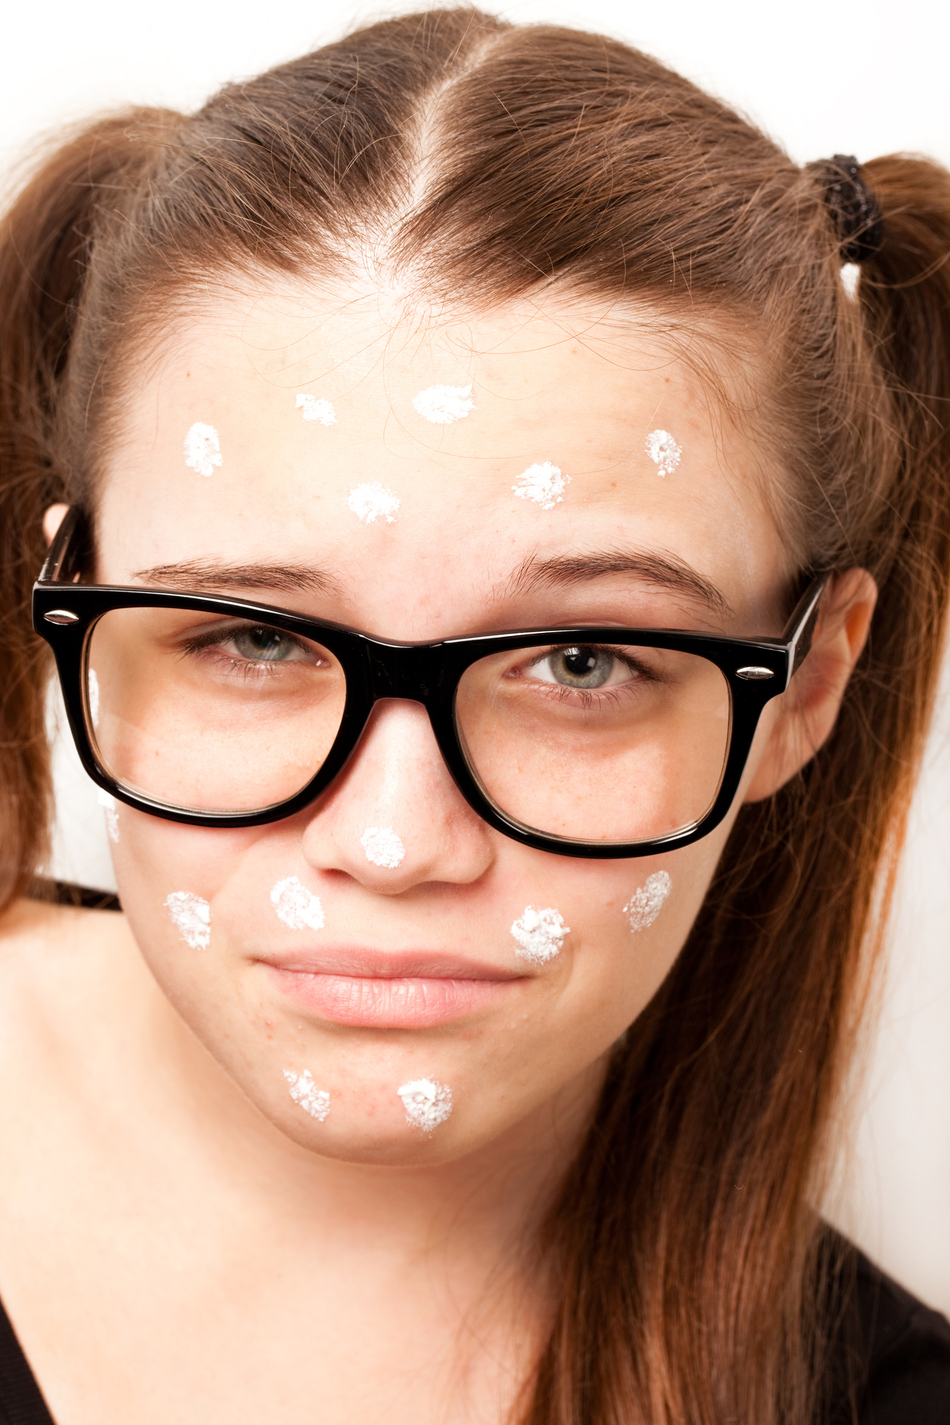 Acne: Embarrassing But Treatable